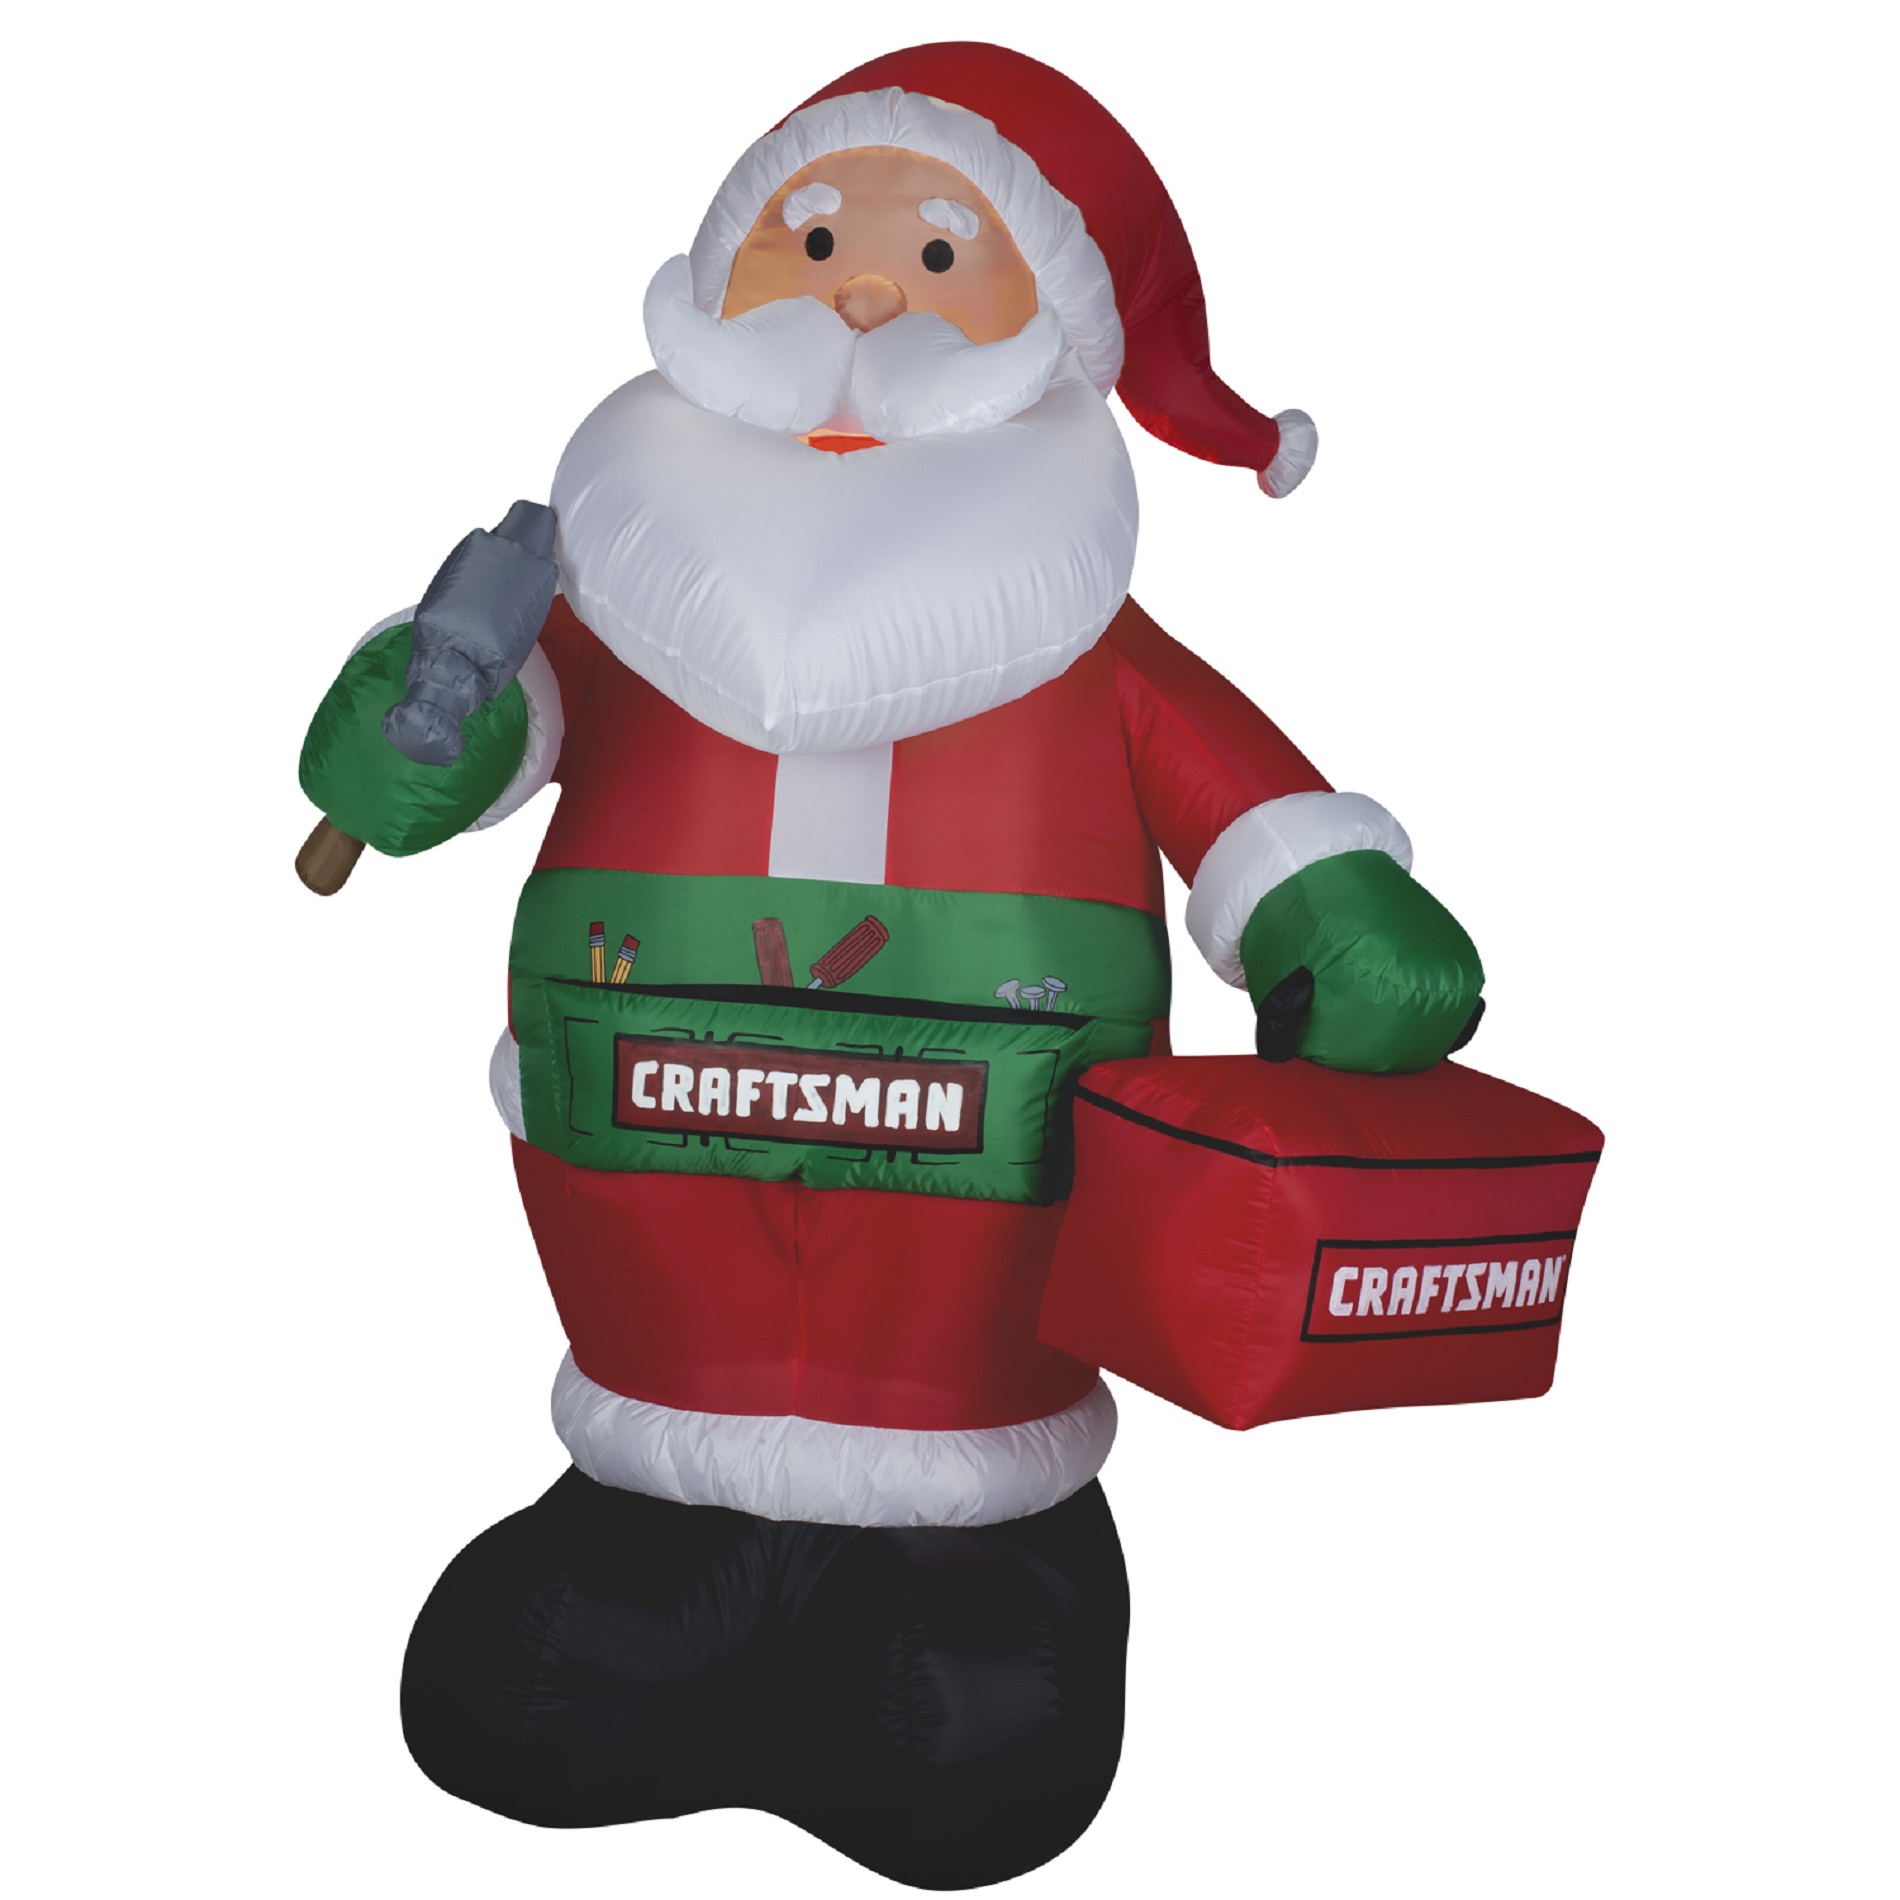 Craftsman Inflatable Santa with Toolbox Decoration